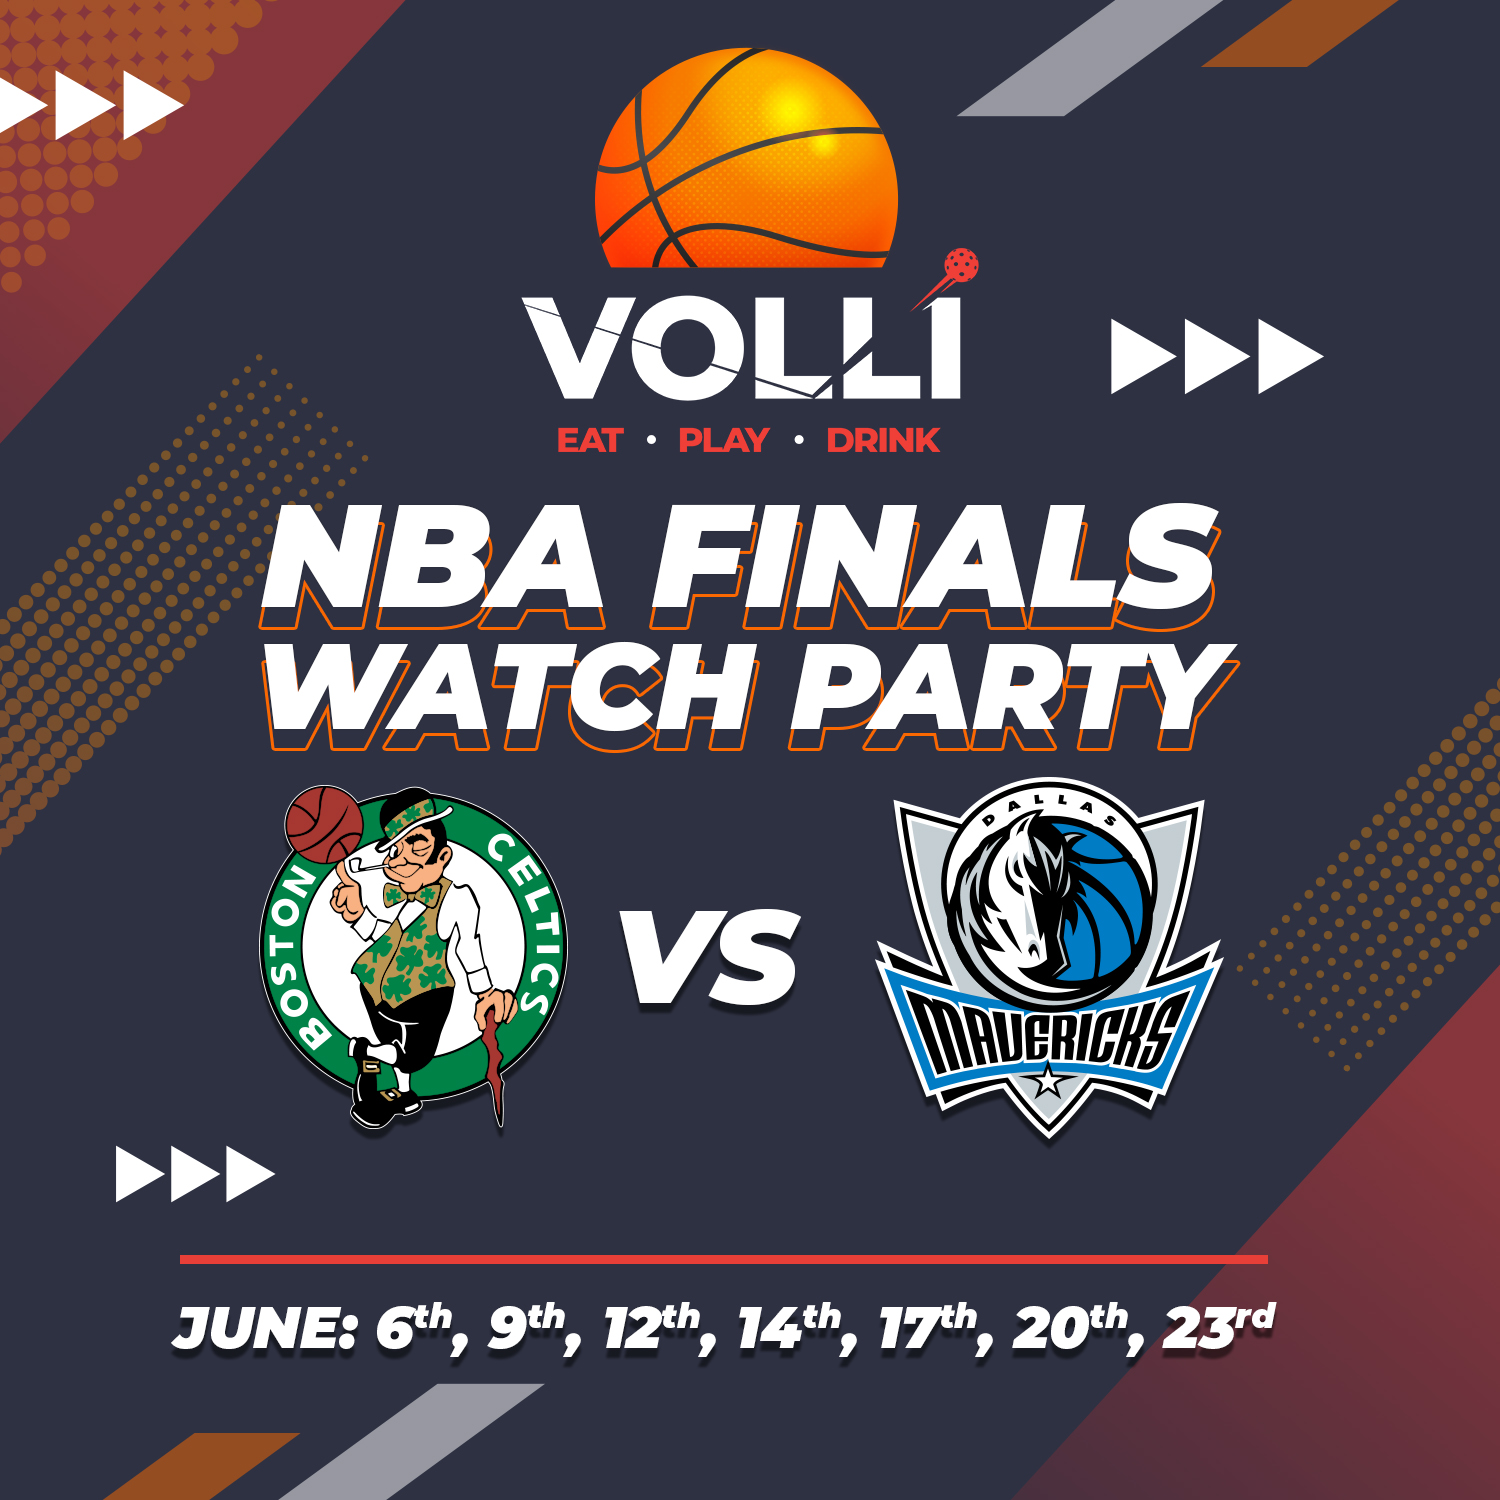 NBA Finals Watch Party – GAME 4